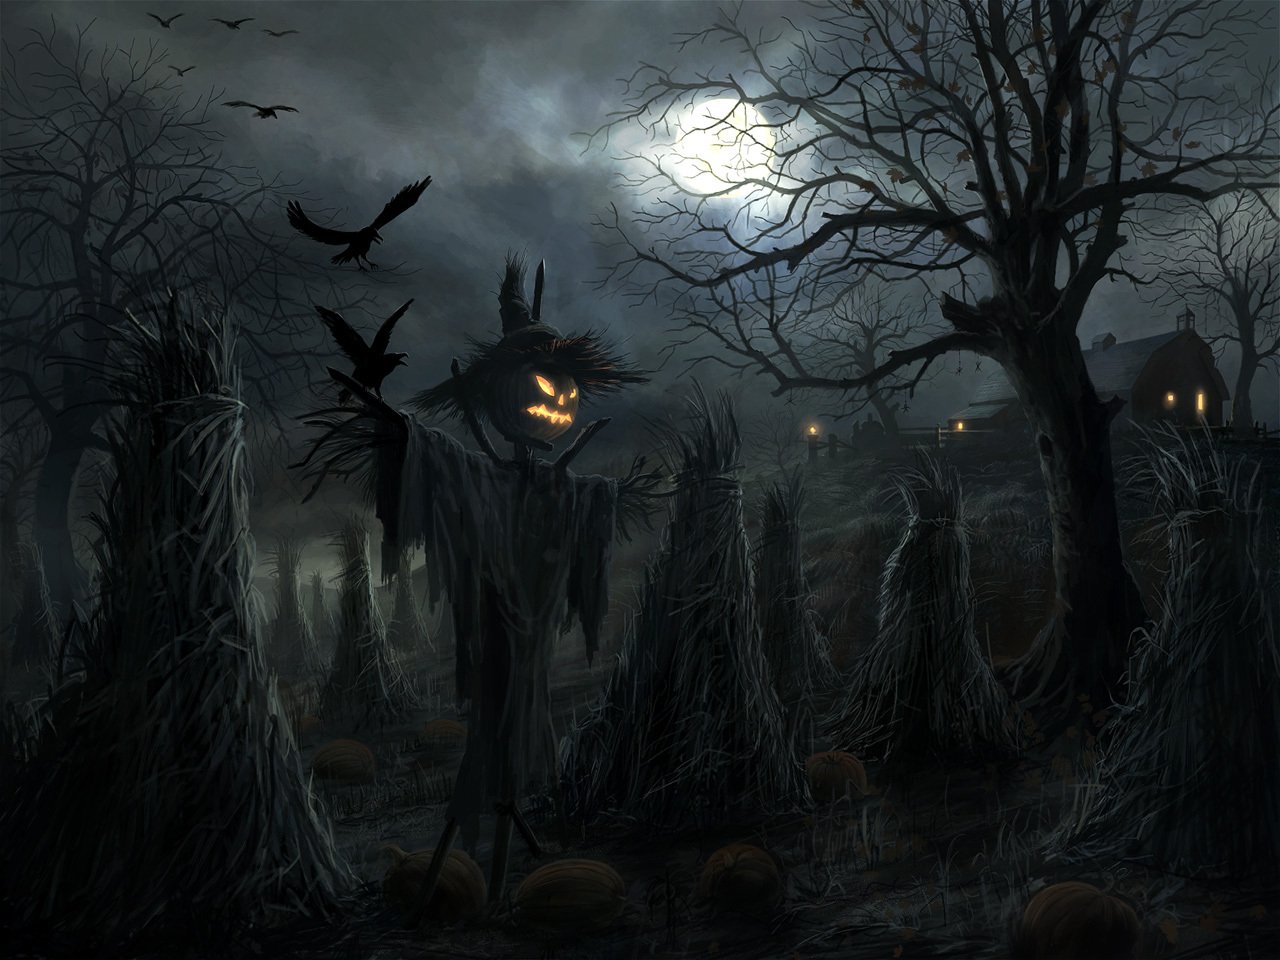 Mobile wallpaper: Halloween, Landscape, Holidays, Night, Moon, 13757 download the picture for free